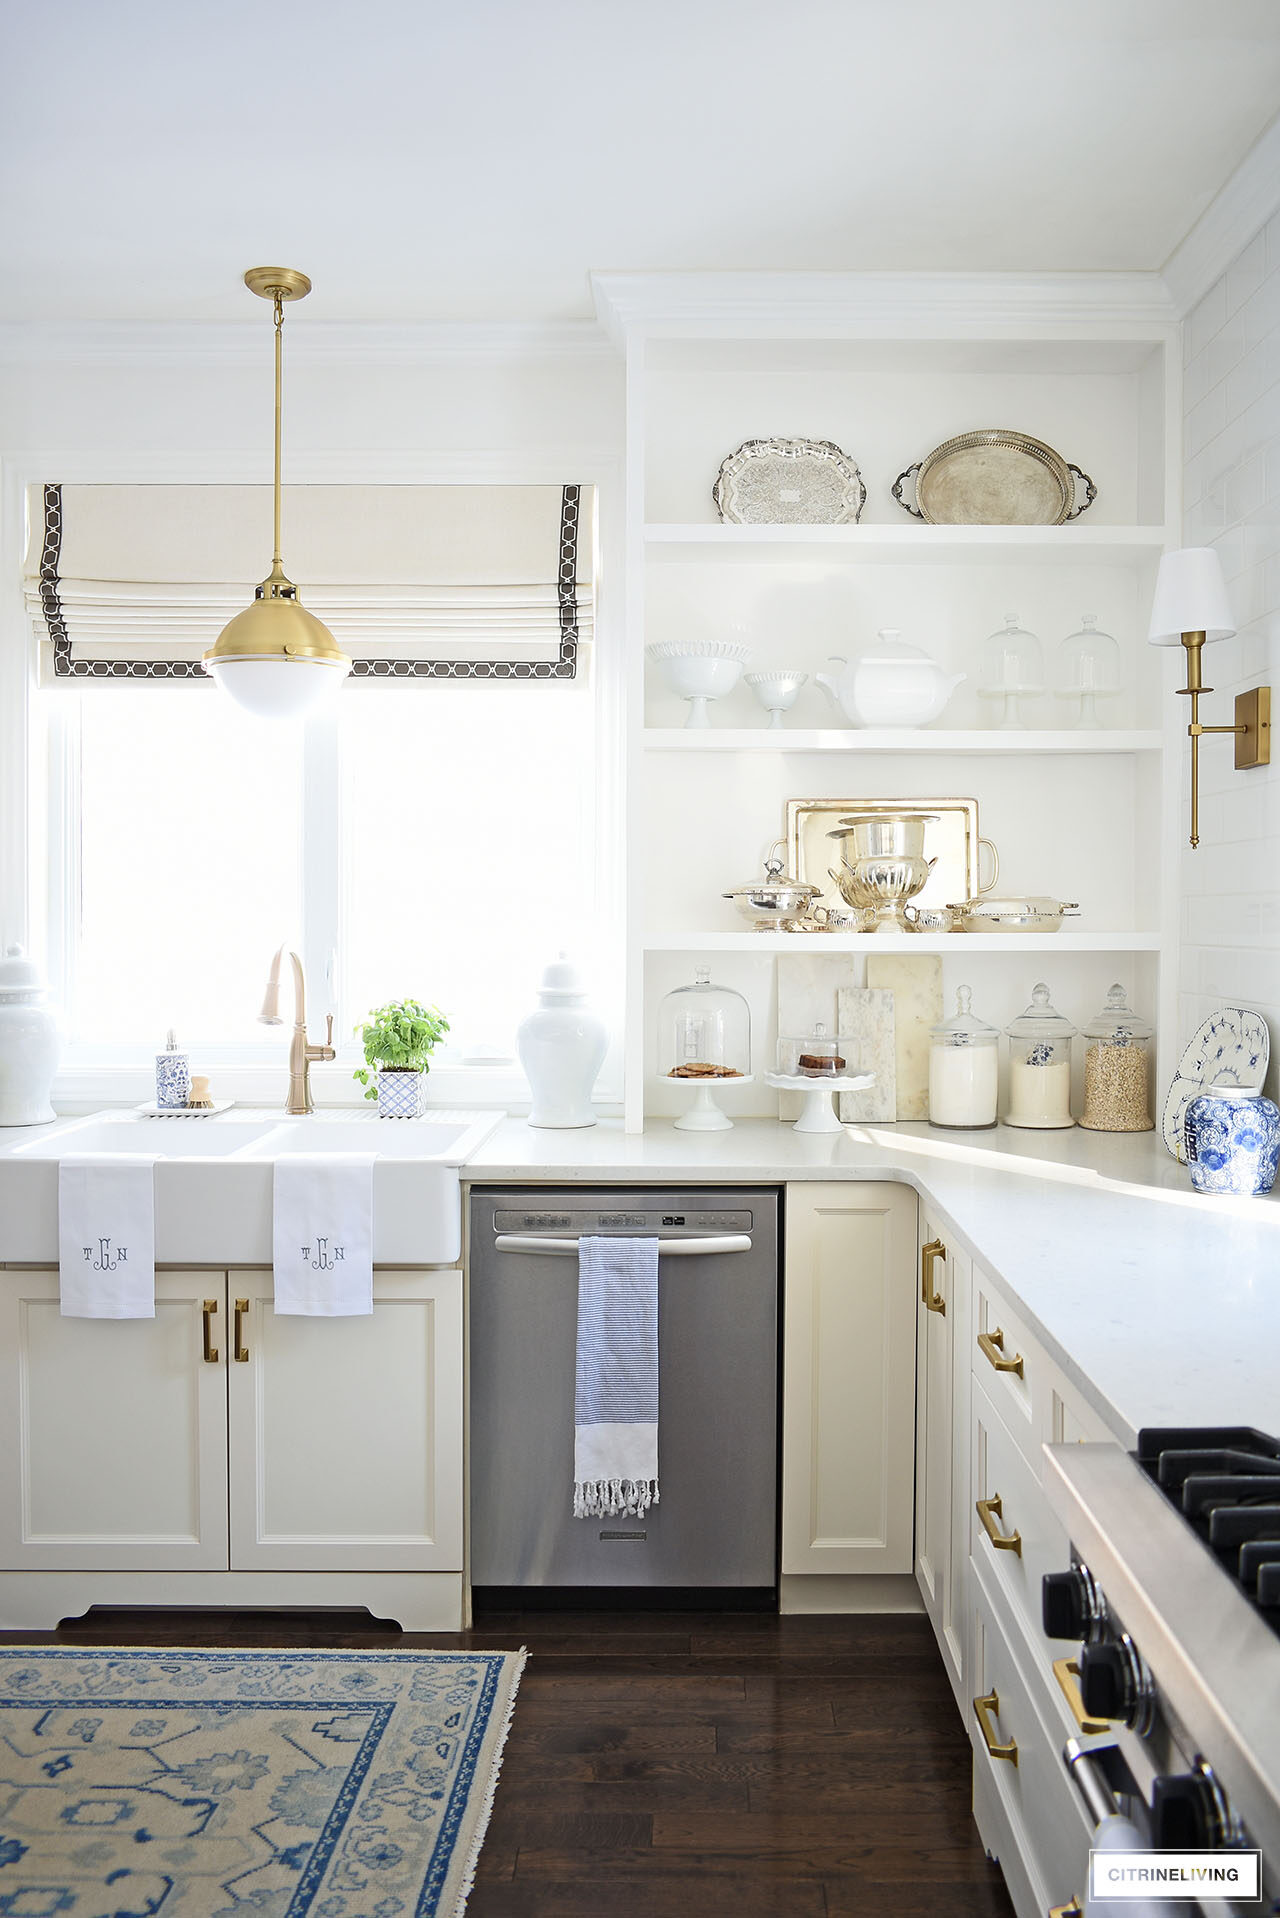 Traditional kitchen styled for spring with open shelves accessorized with silver serving pieces, white ceramics and glass apothecary canisters.